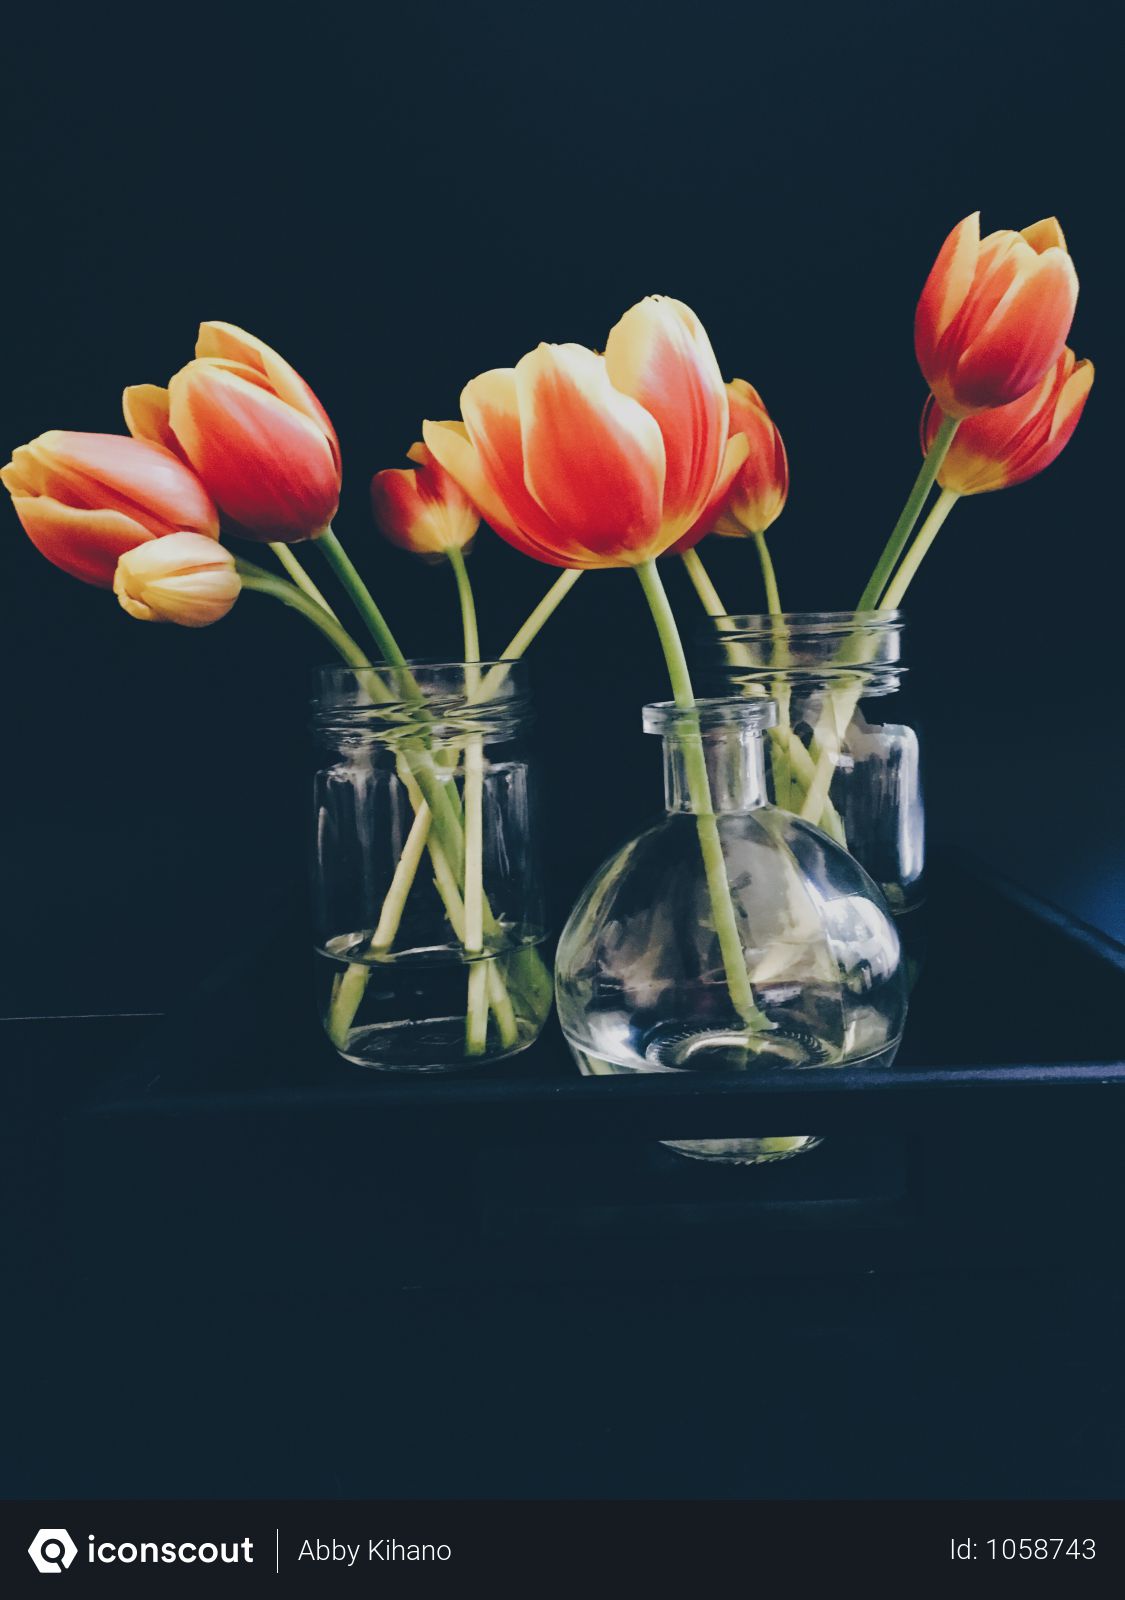 Free Red And Yellow Tulips In Clear Glass Jar And Vase Still Life Painting Photo Download In Png Jpg Format